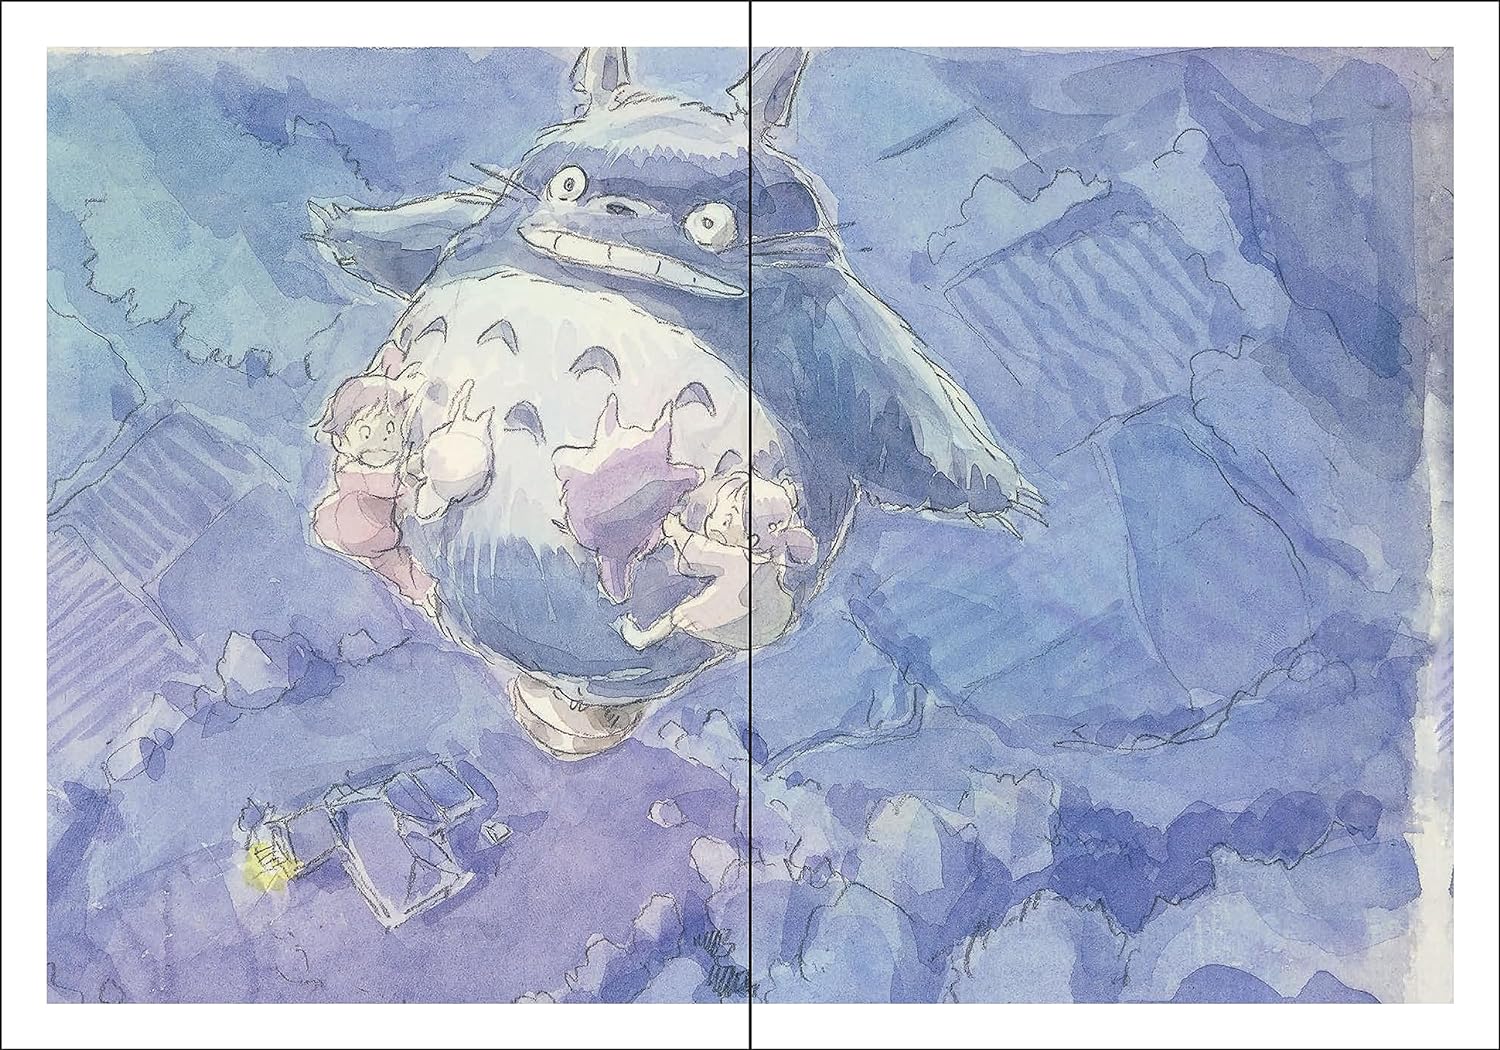 My Neighbor Totoro Journal - Out of the Blue